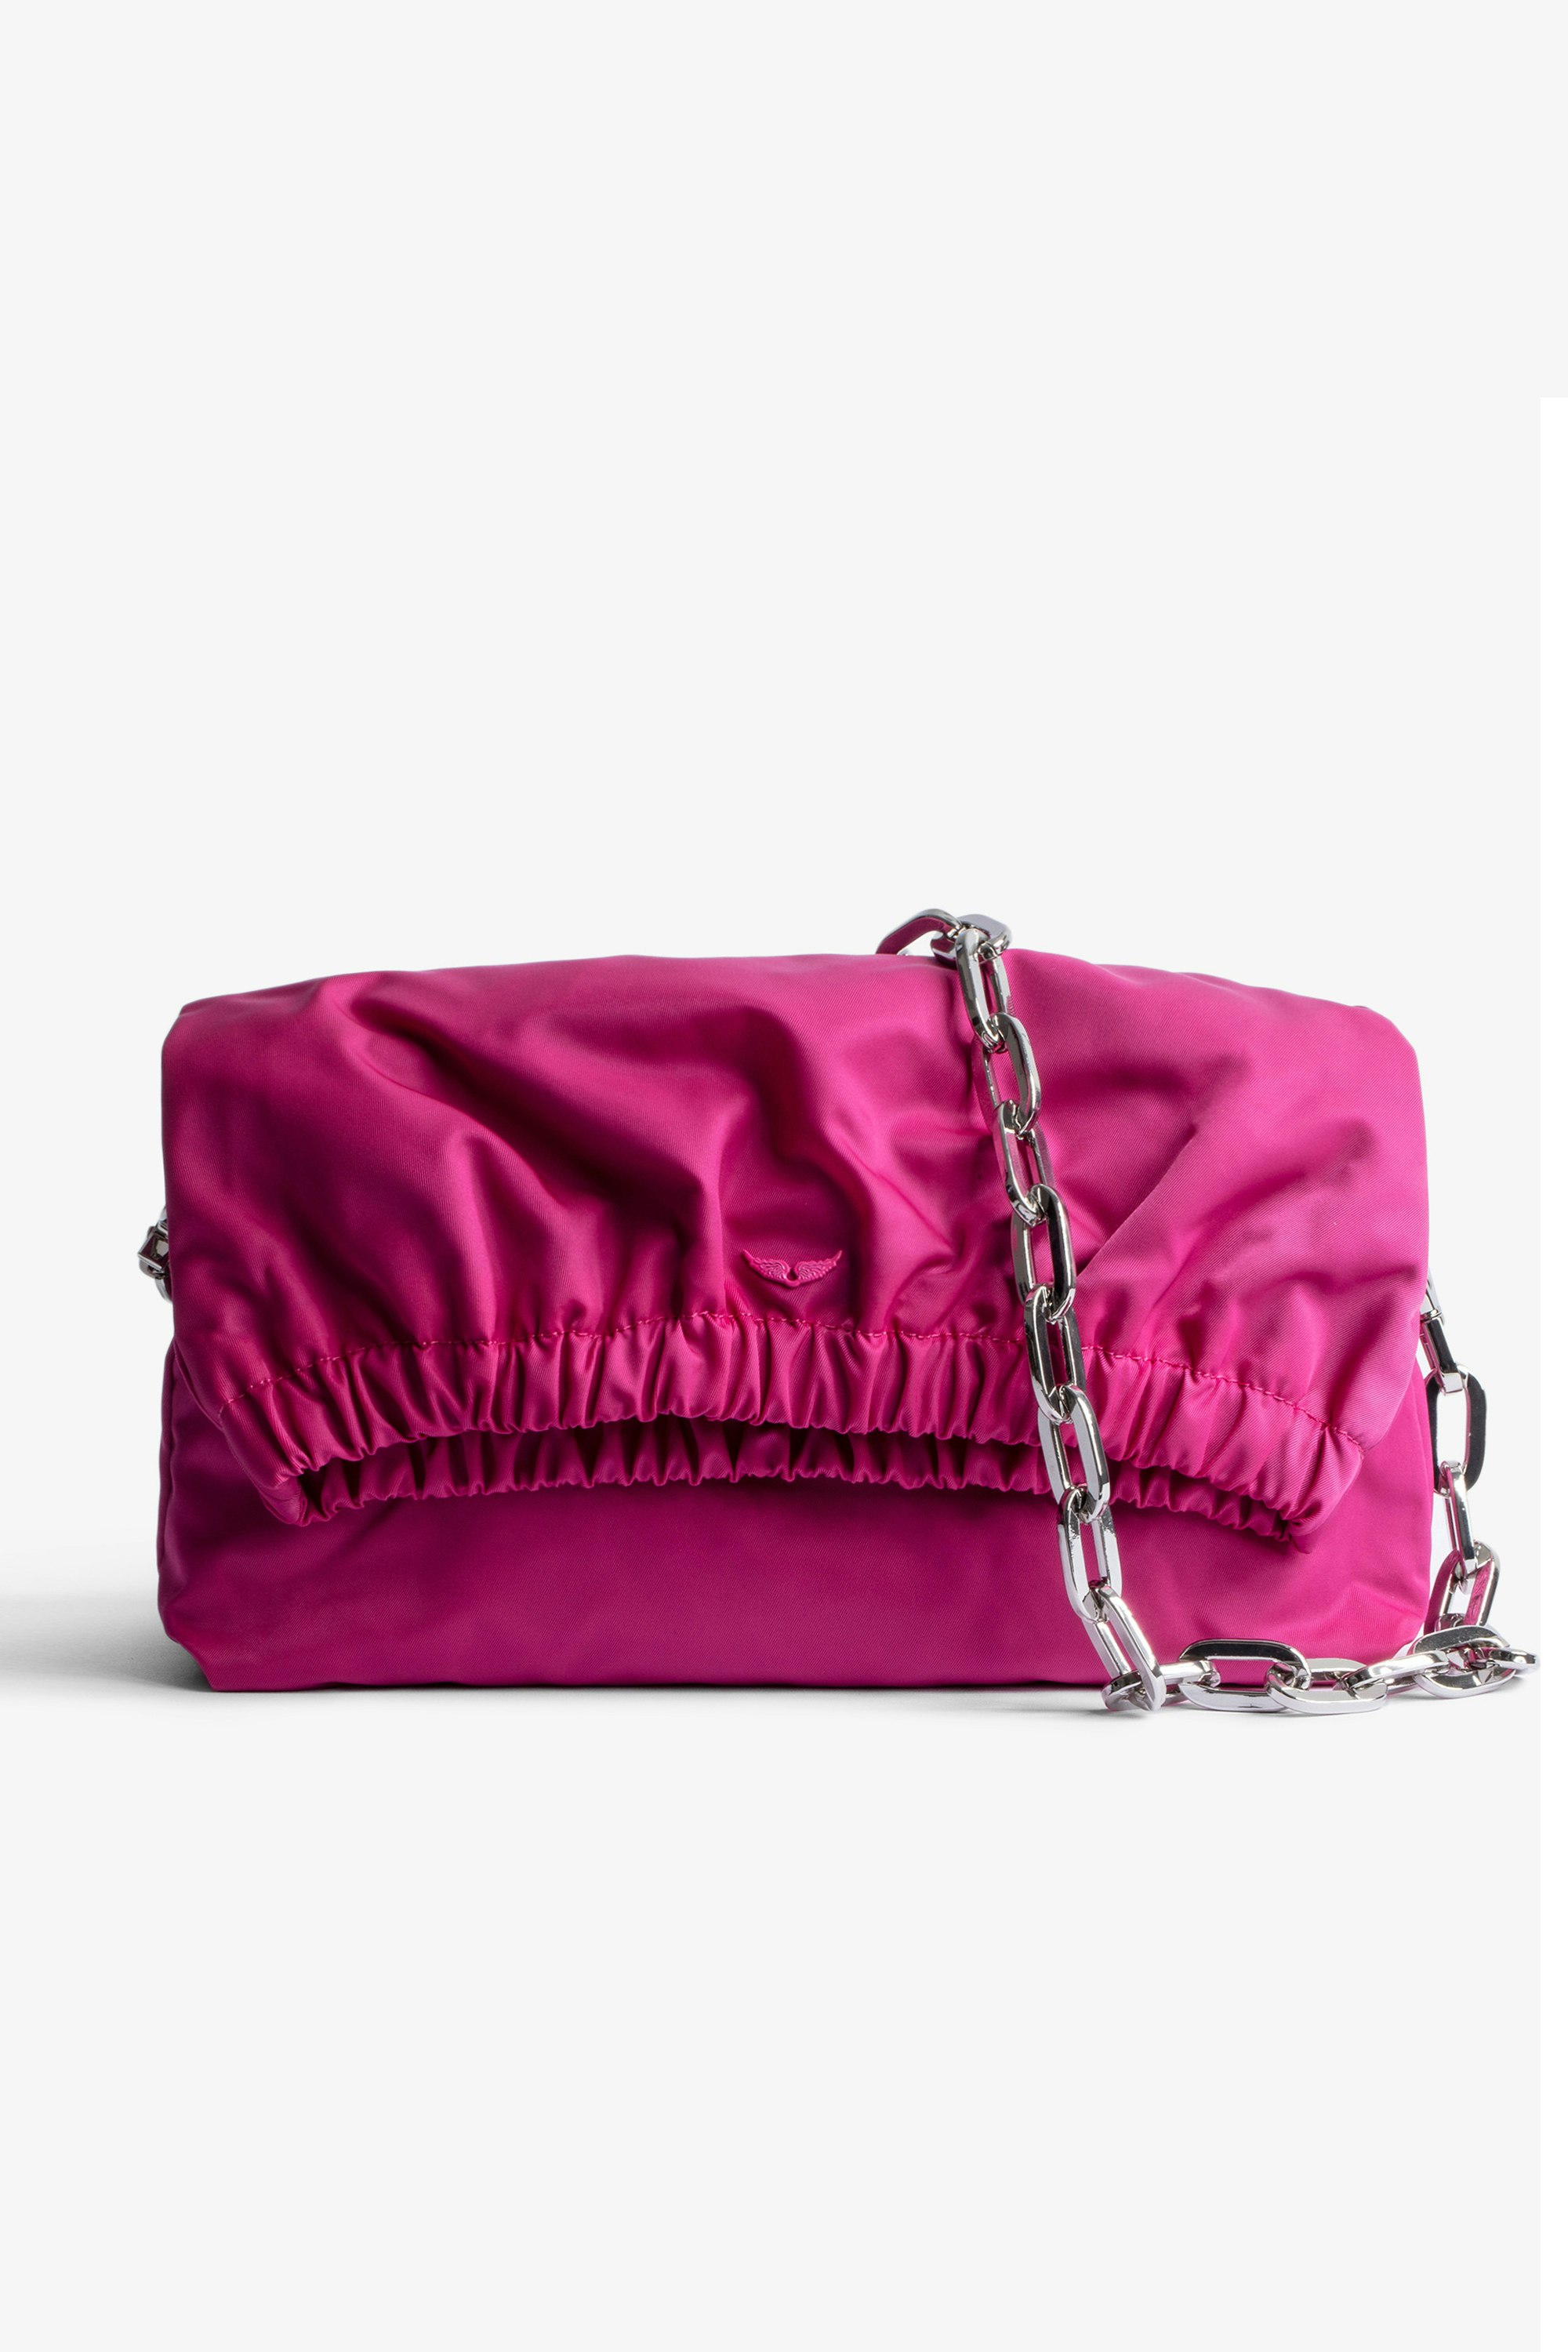 Rockyssime バッグ Women’s clutch bag in pink nylon with metal chain